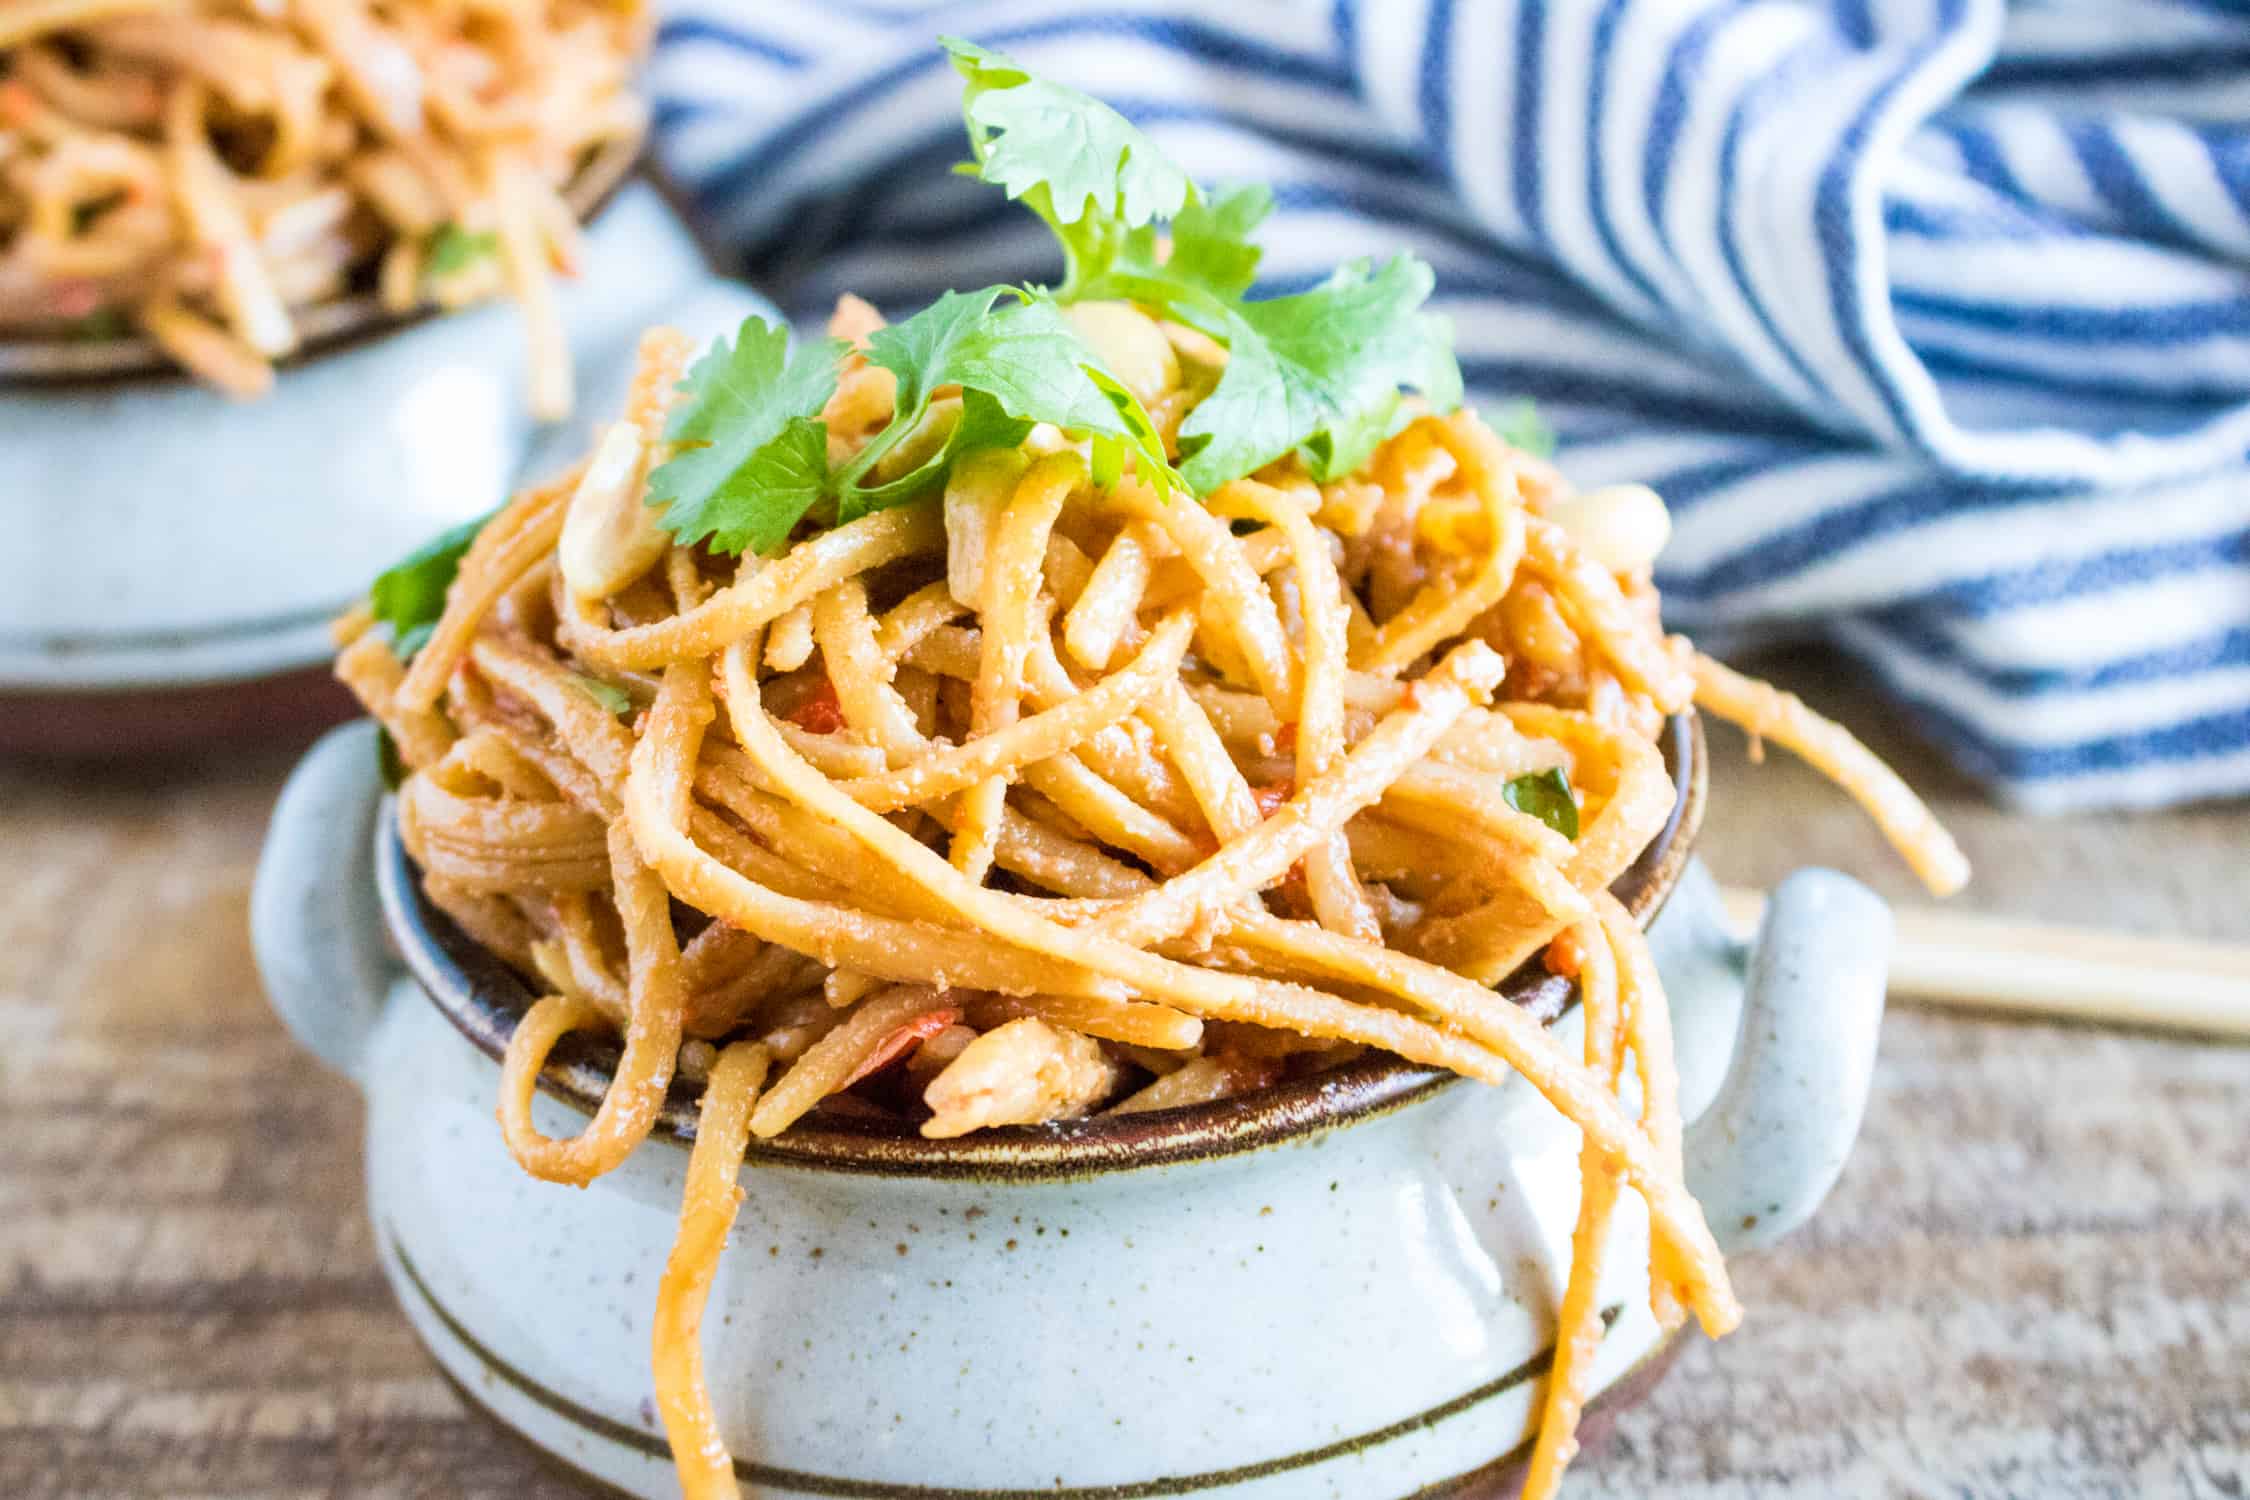 A brown and white ceramic bowl filled with Instant Pot Thai Peanut Noodles garnished with cilantro with a blue and white striped kitchen towel in the background